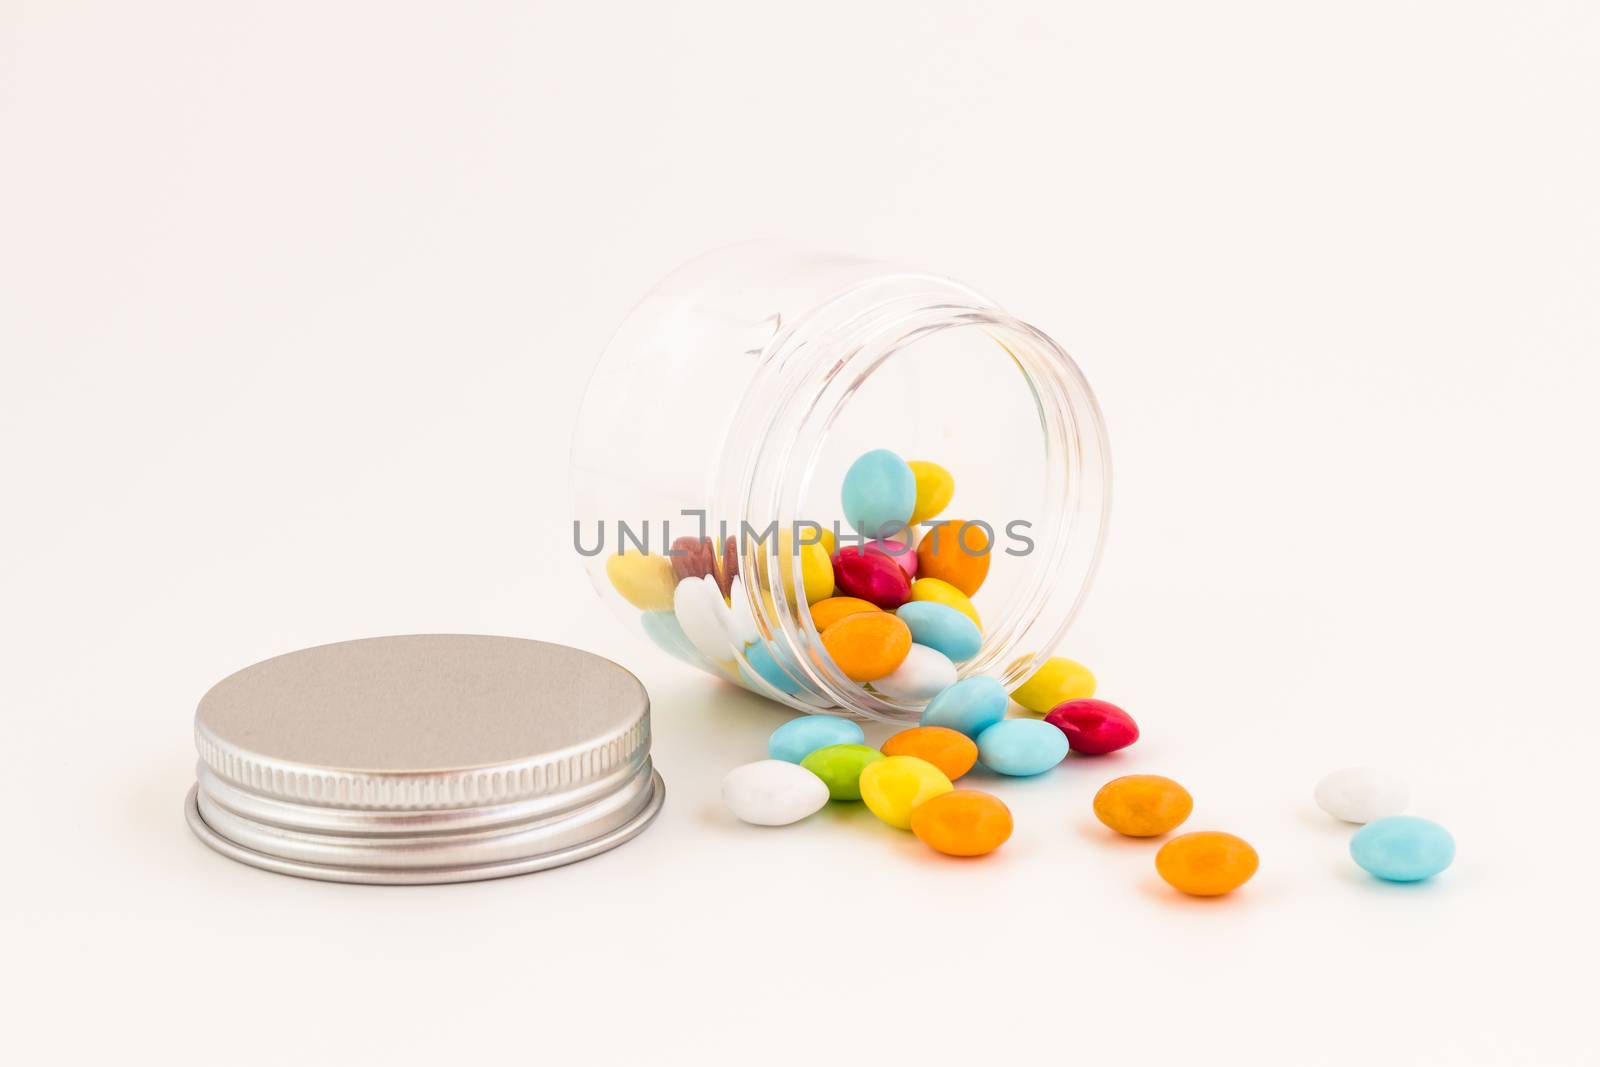 Colored smarties scattered out of an open glass jar, isolated on white background. Shallow depth of field.